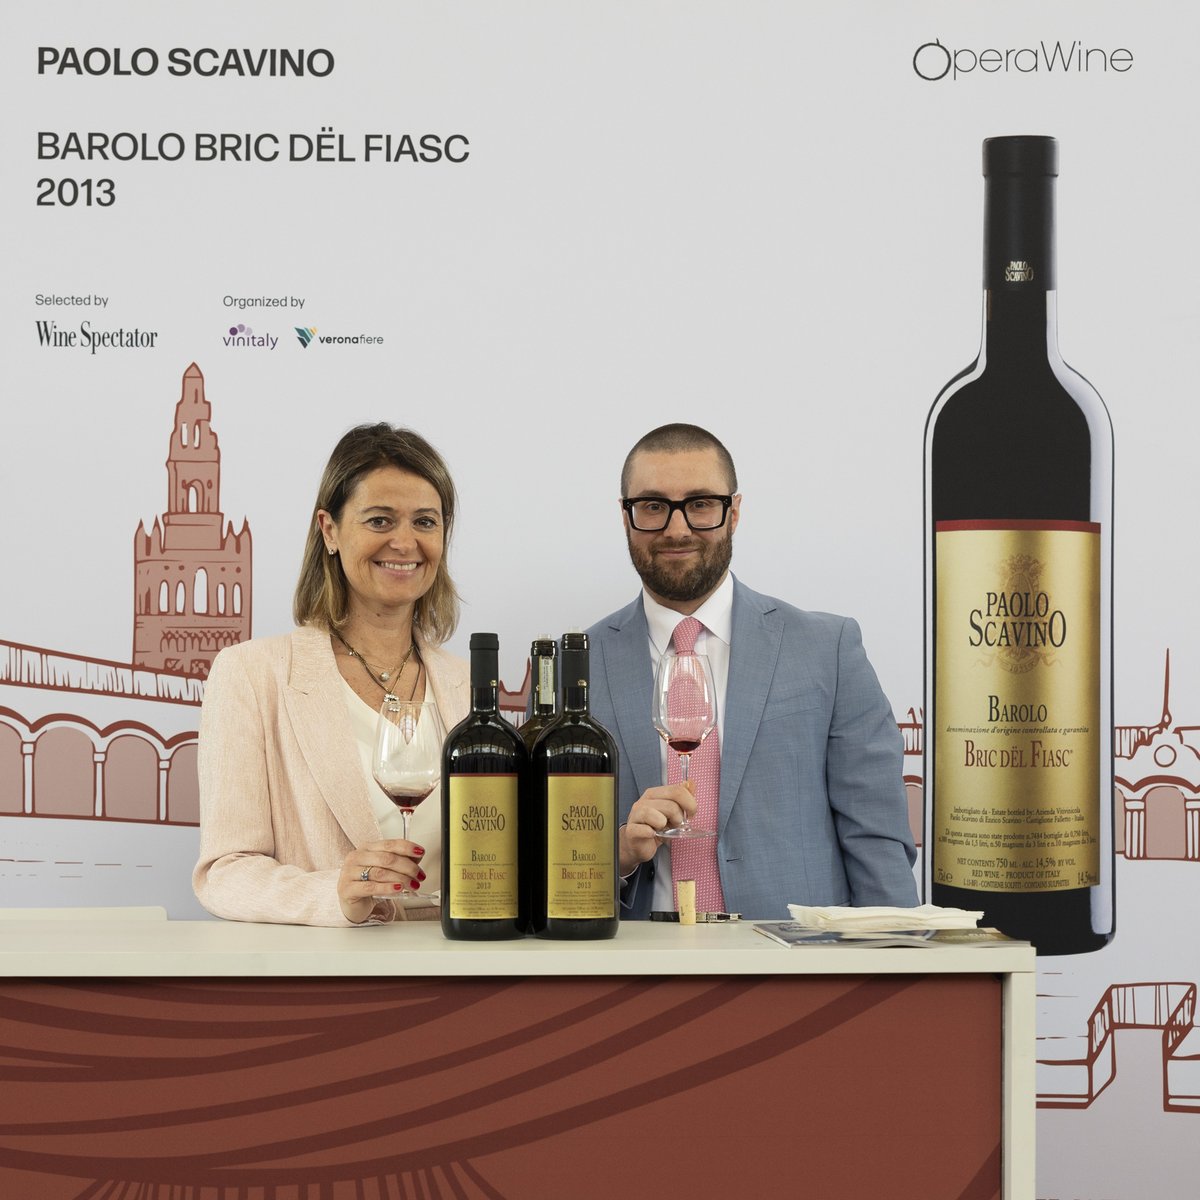 Here is the portrait of Paolo Scavino, one of the great Italian producers selected by Wine Spectator for #OperaWine2024. During this year's Grand Tasting, they shared with guests their Barolo Bric dël Fiasc 2013. Congratulations! #OperaWine #Vinitaly2024 #finestitalianwines